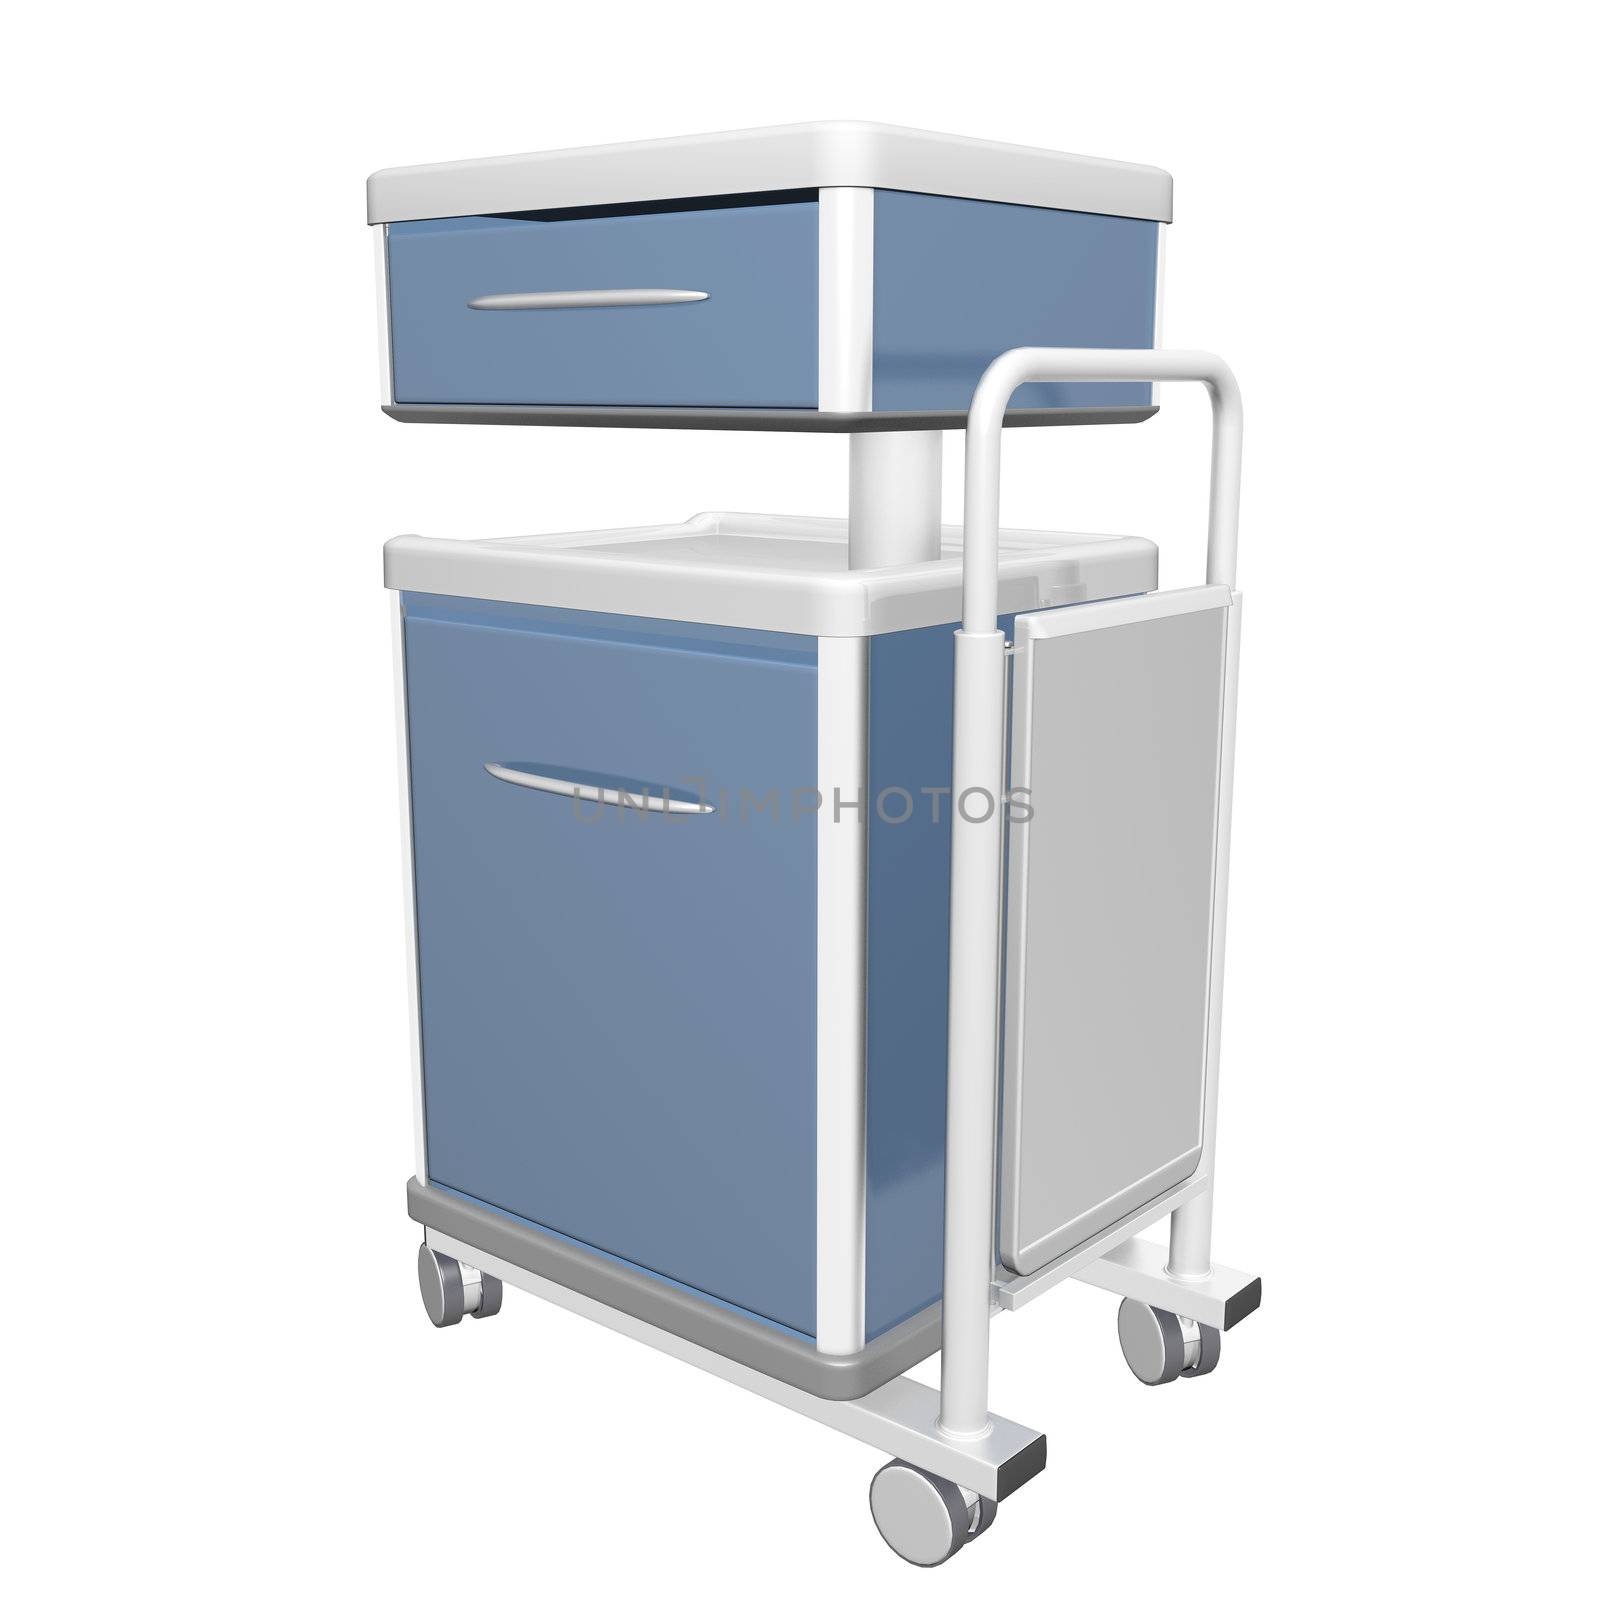 Blue and white stainless metal medical supply cabinet placed on a trolley, 3d illustration, isolated against a white background